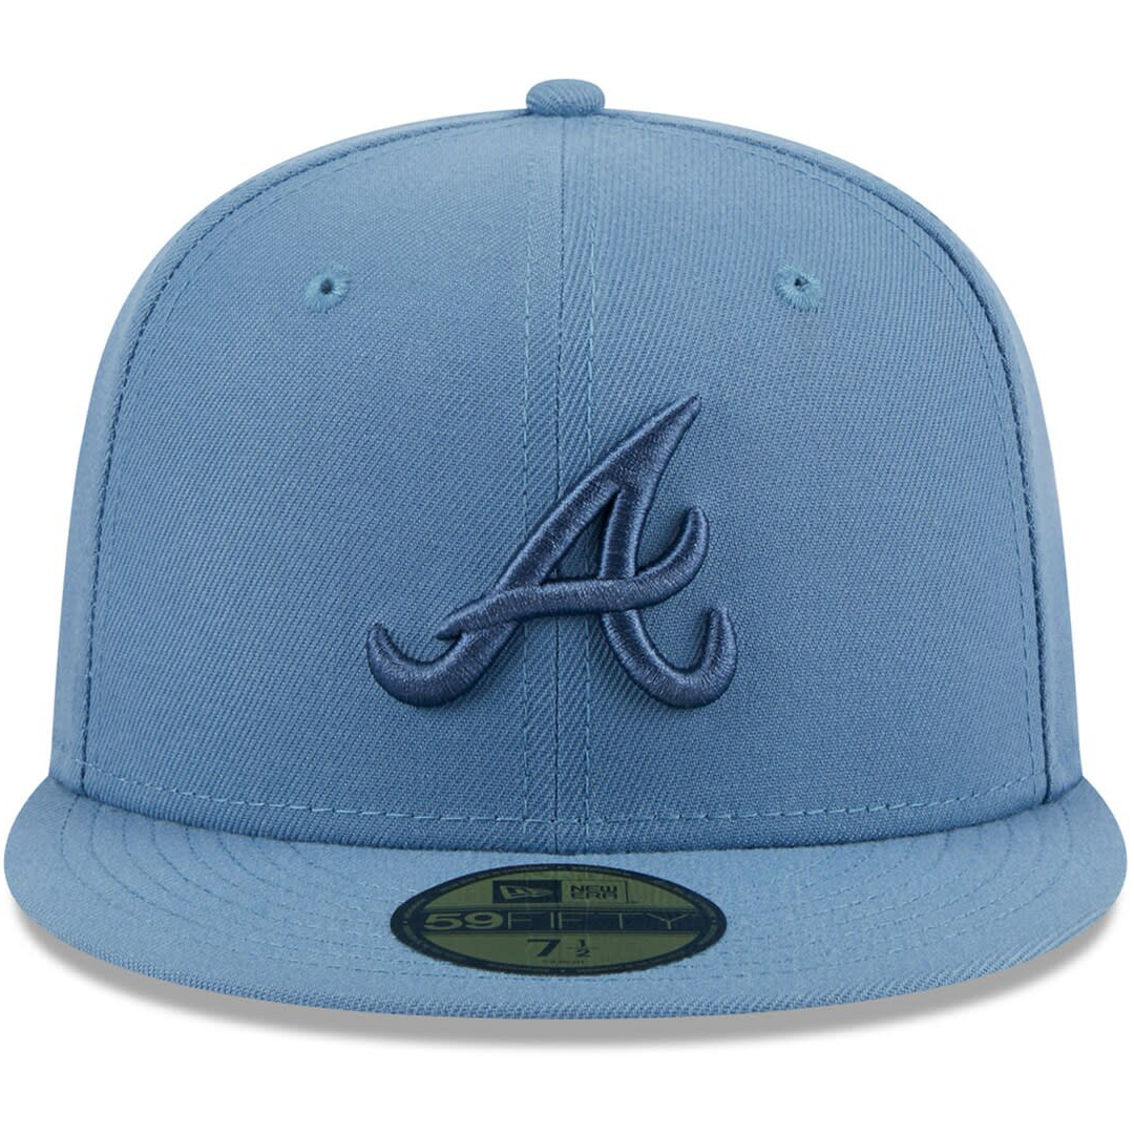 New Era Men's Blue Atlanta Braves Spring Color 59FIFTY Fitted Hat - Image 3 of 4